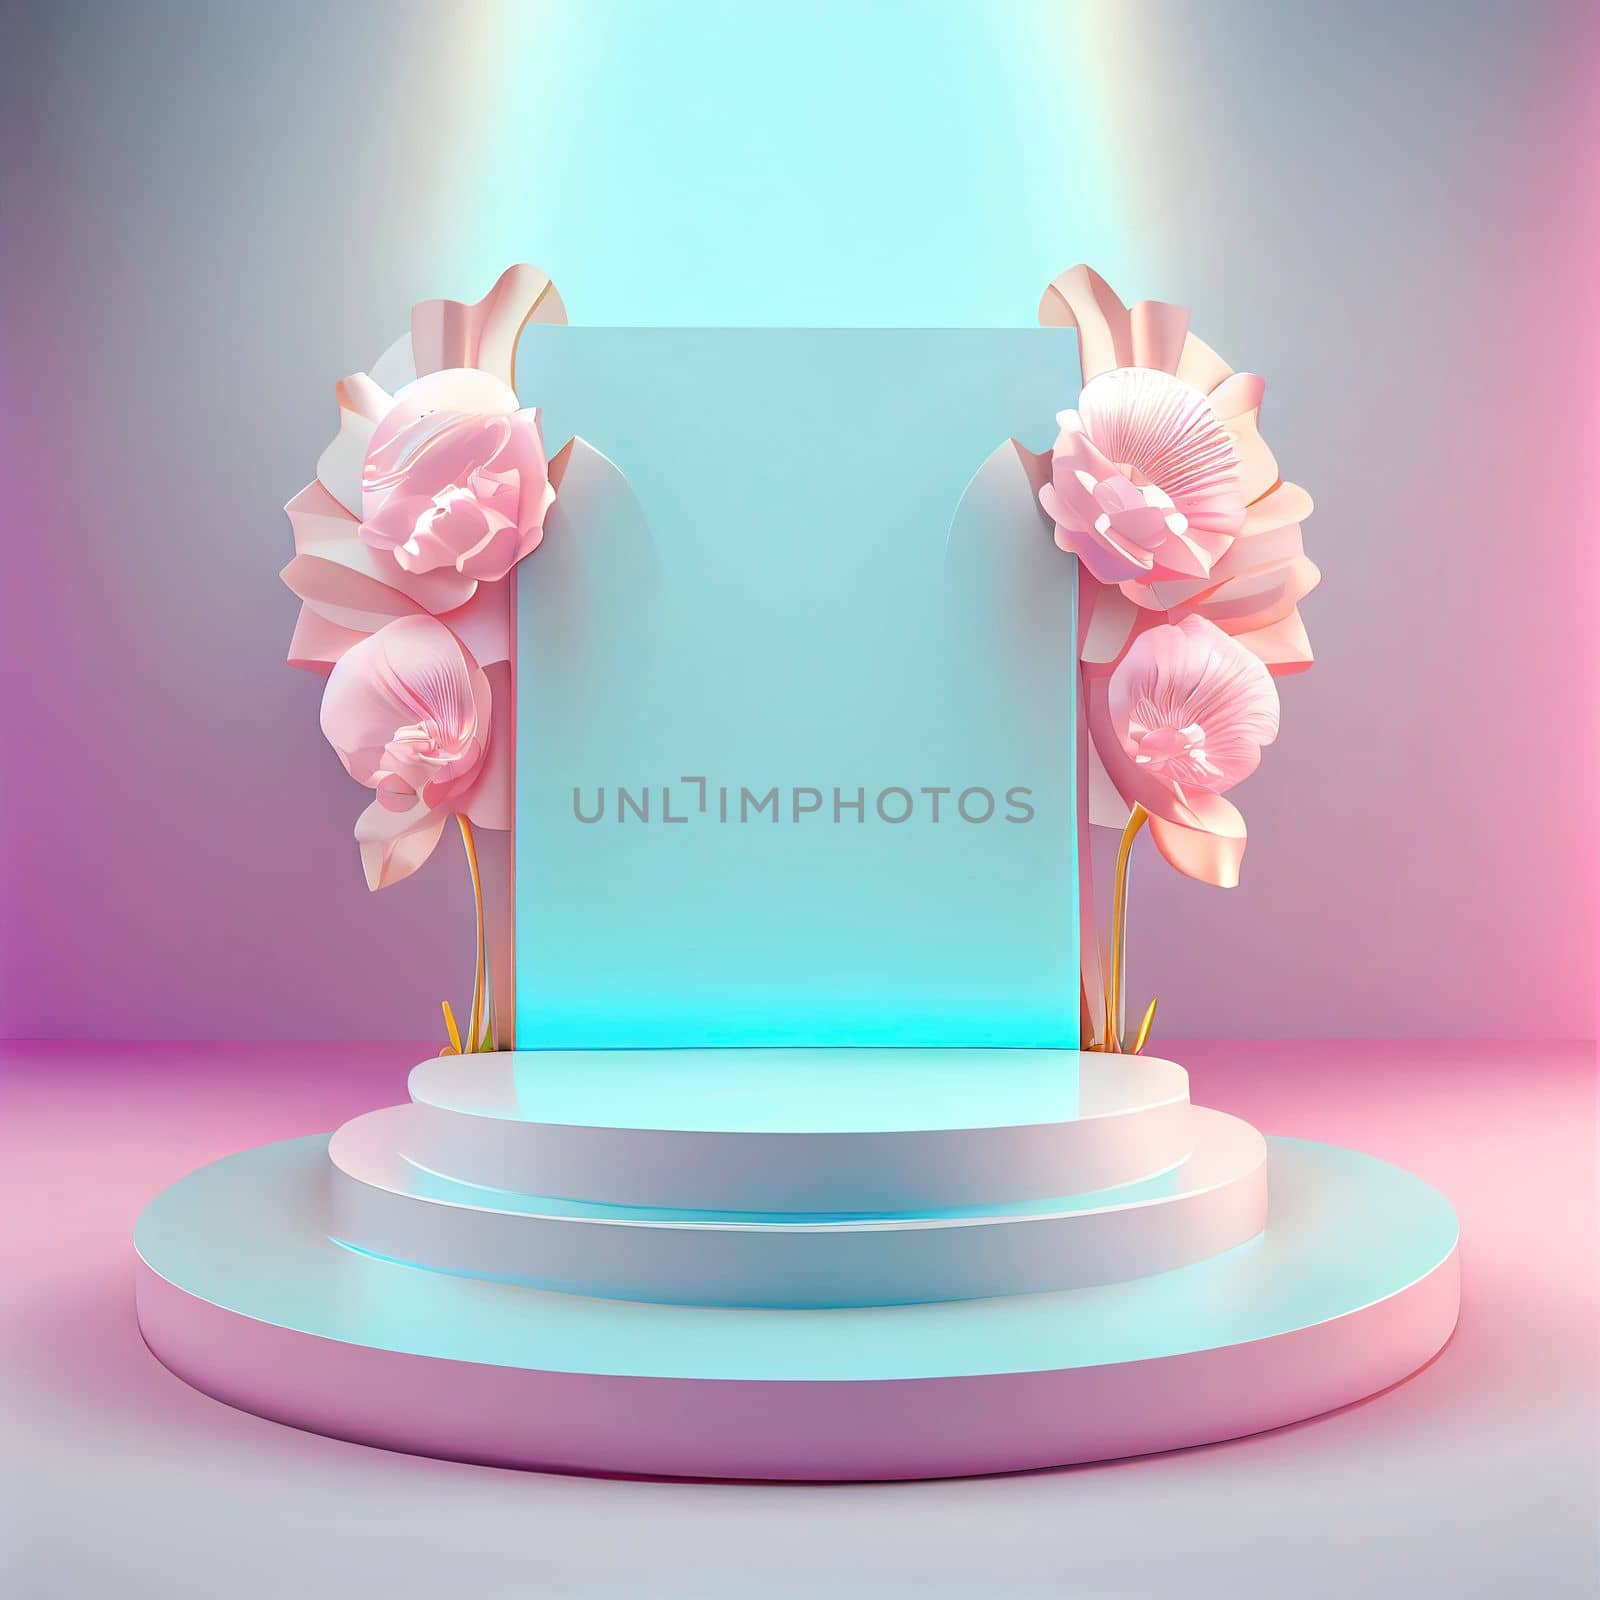 Pink podium 3d illustration for product display